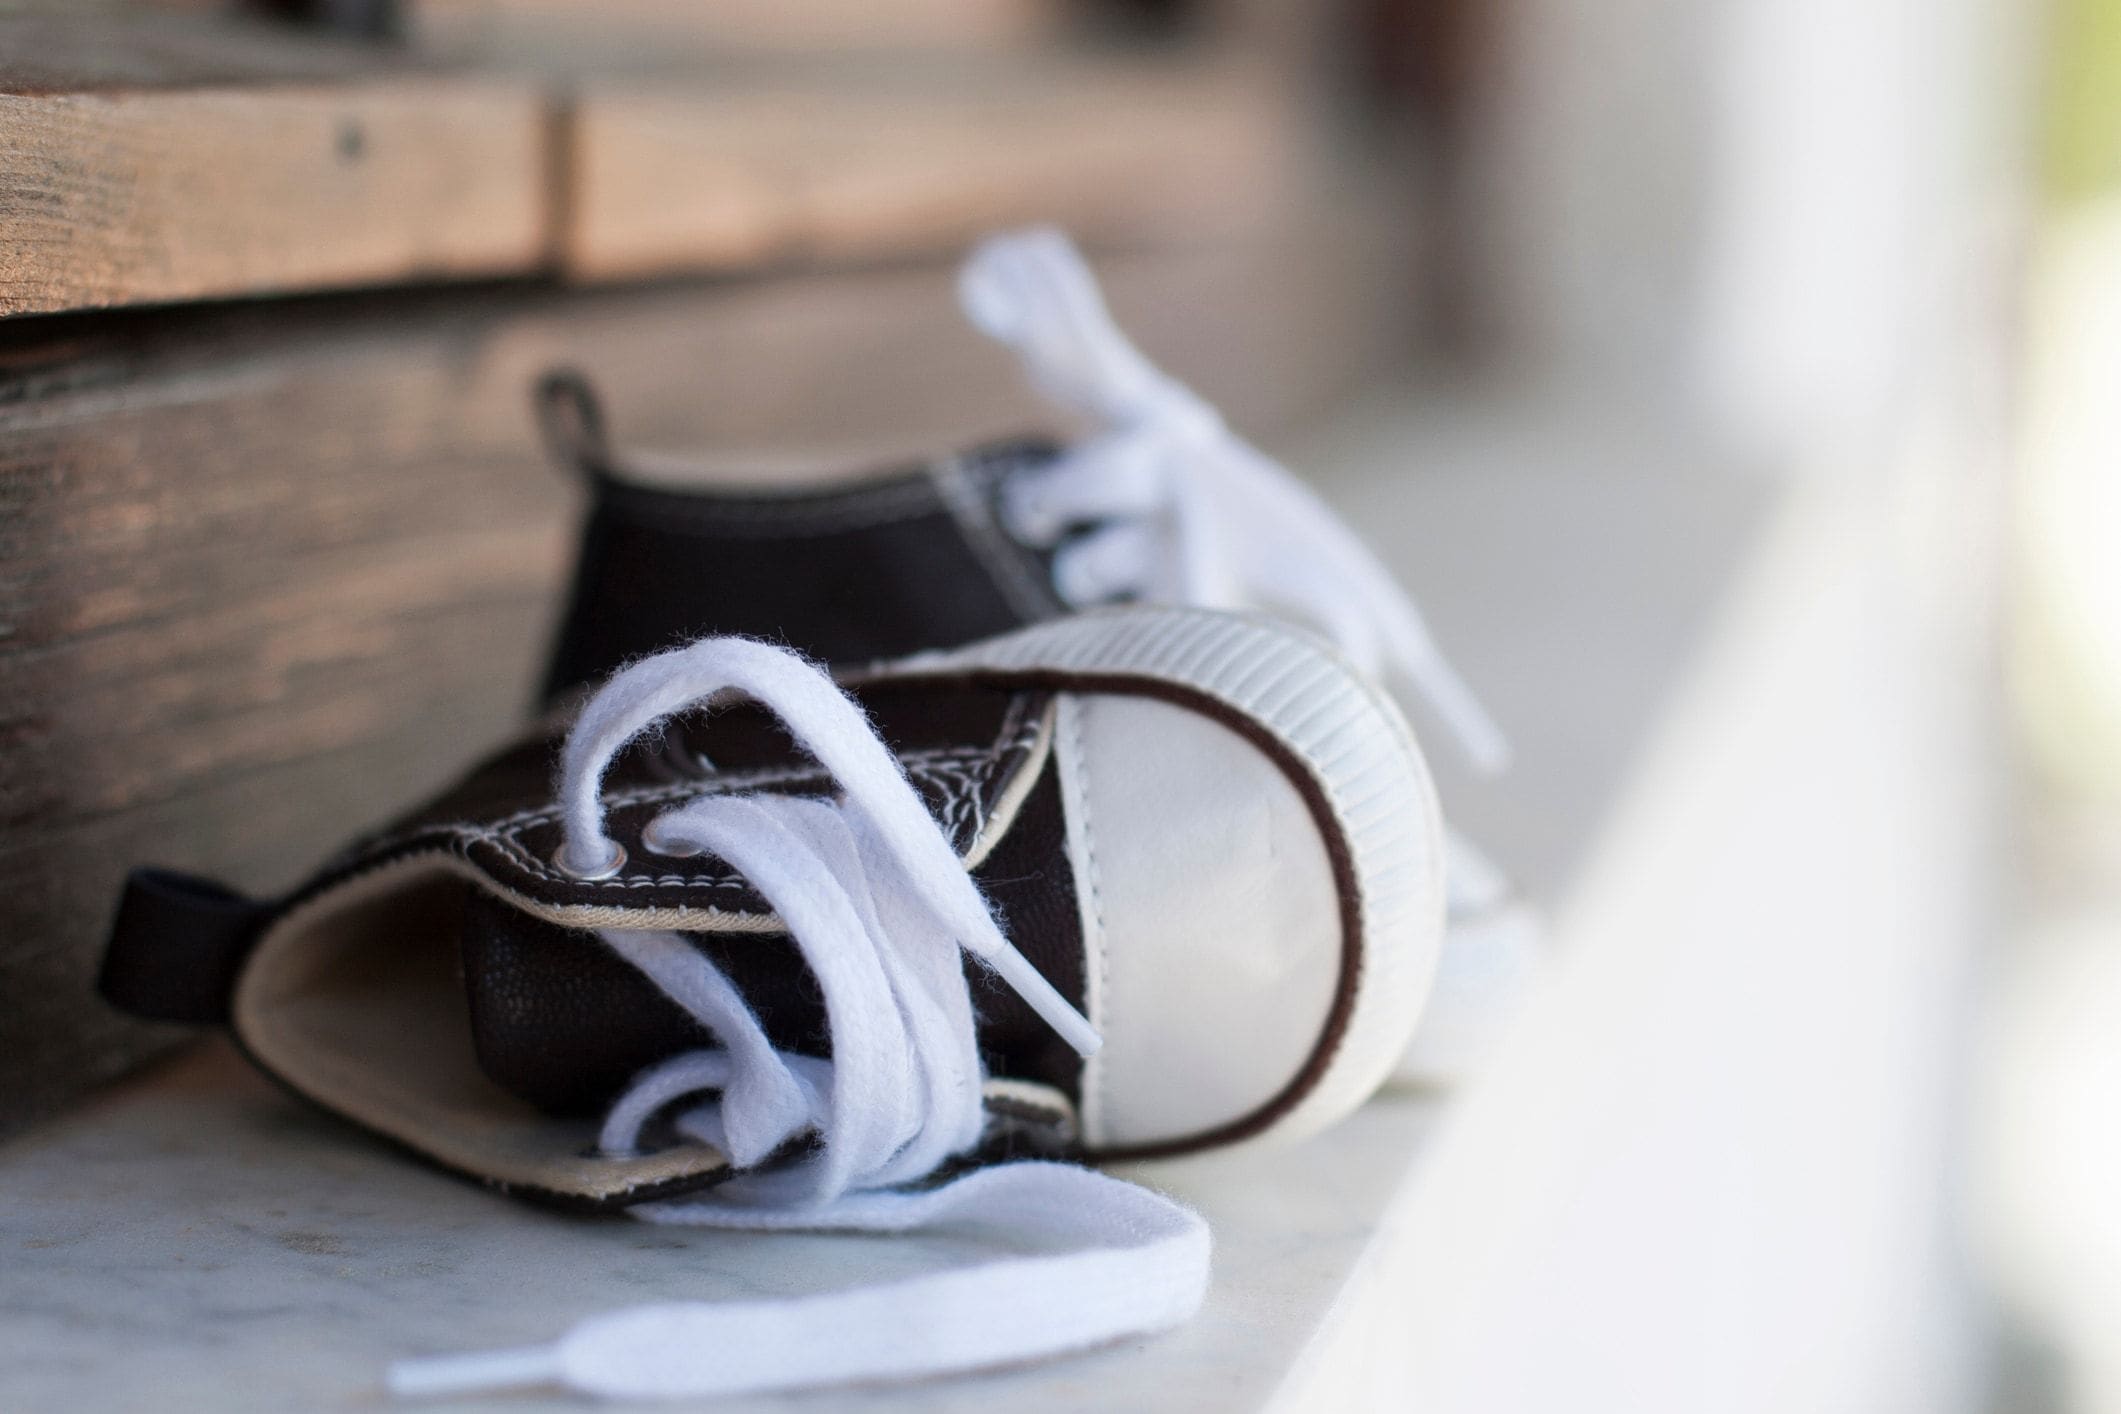 sofa Seem Filthy Baby shoe sizes: What you need to know - Care.com Resources